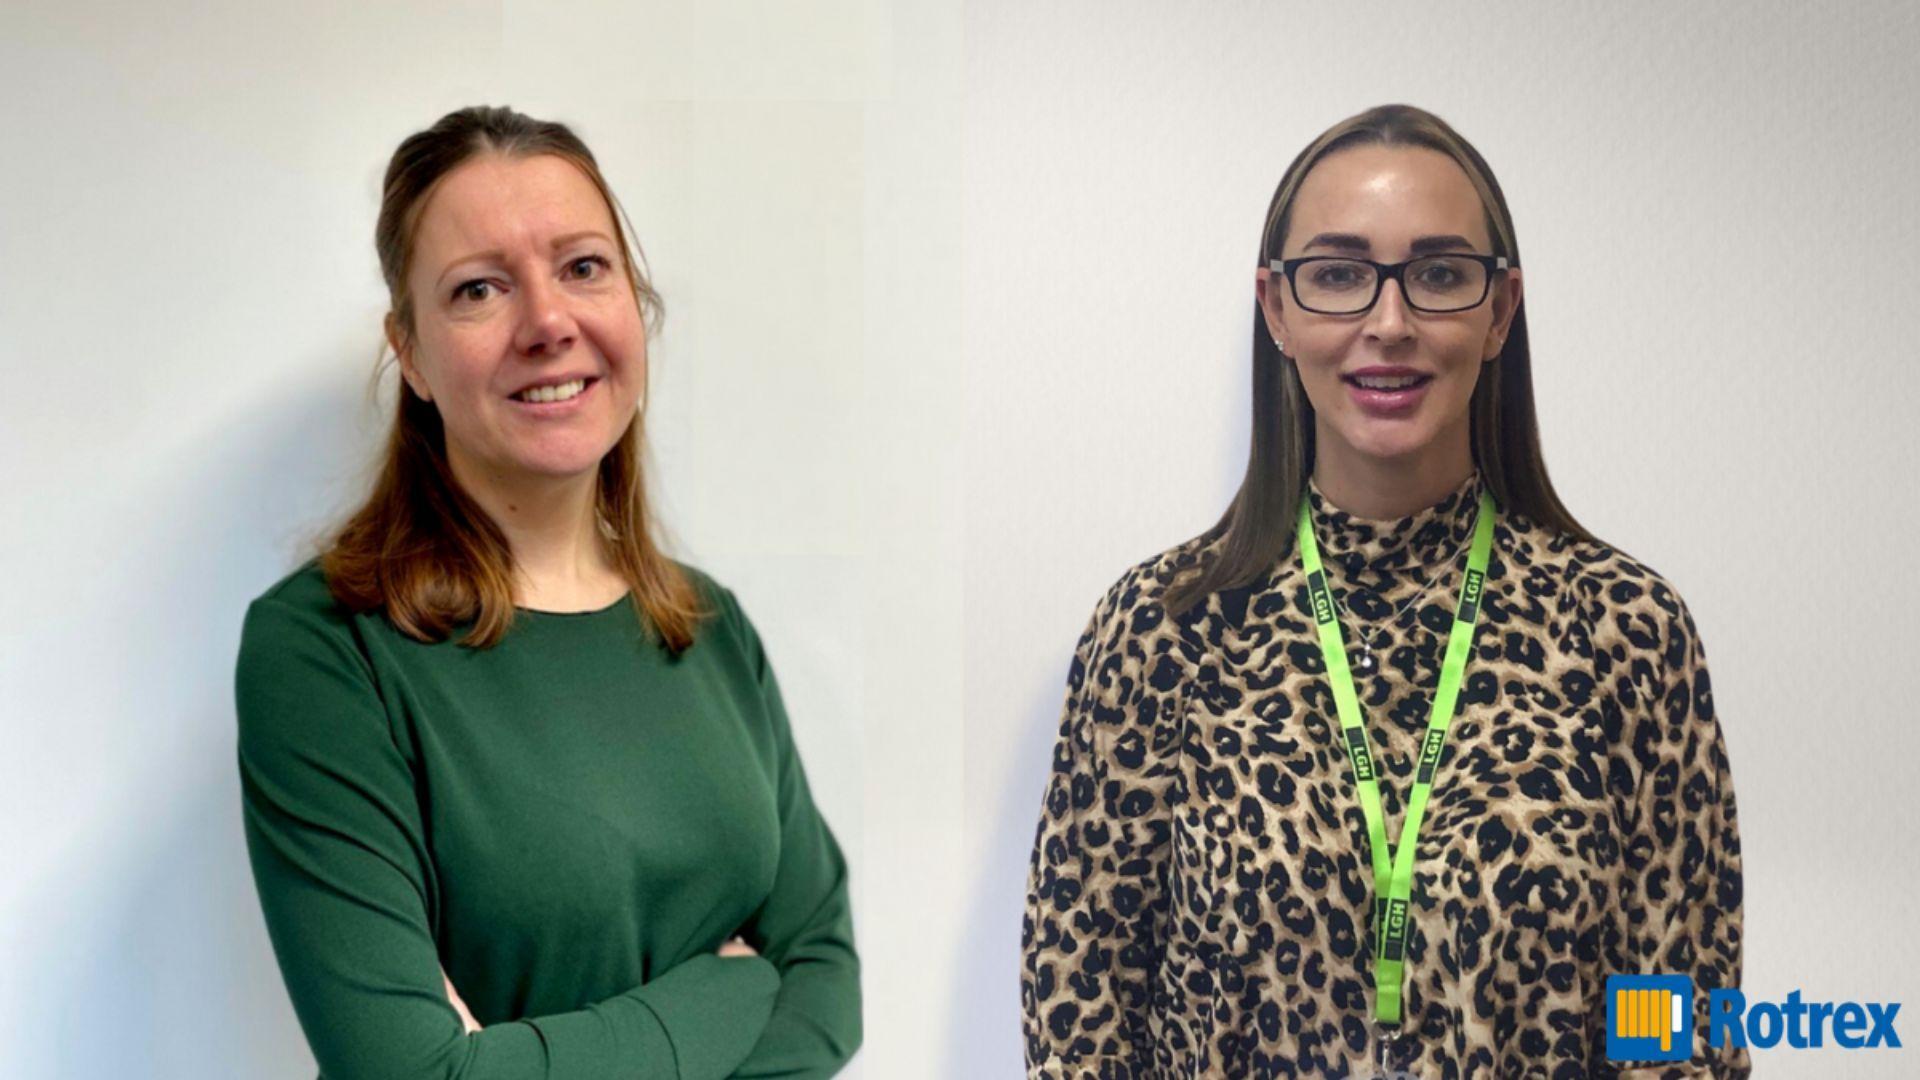 LGH and Rotrex Announce Key HR Appointments